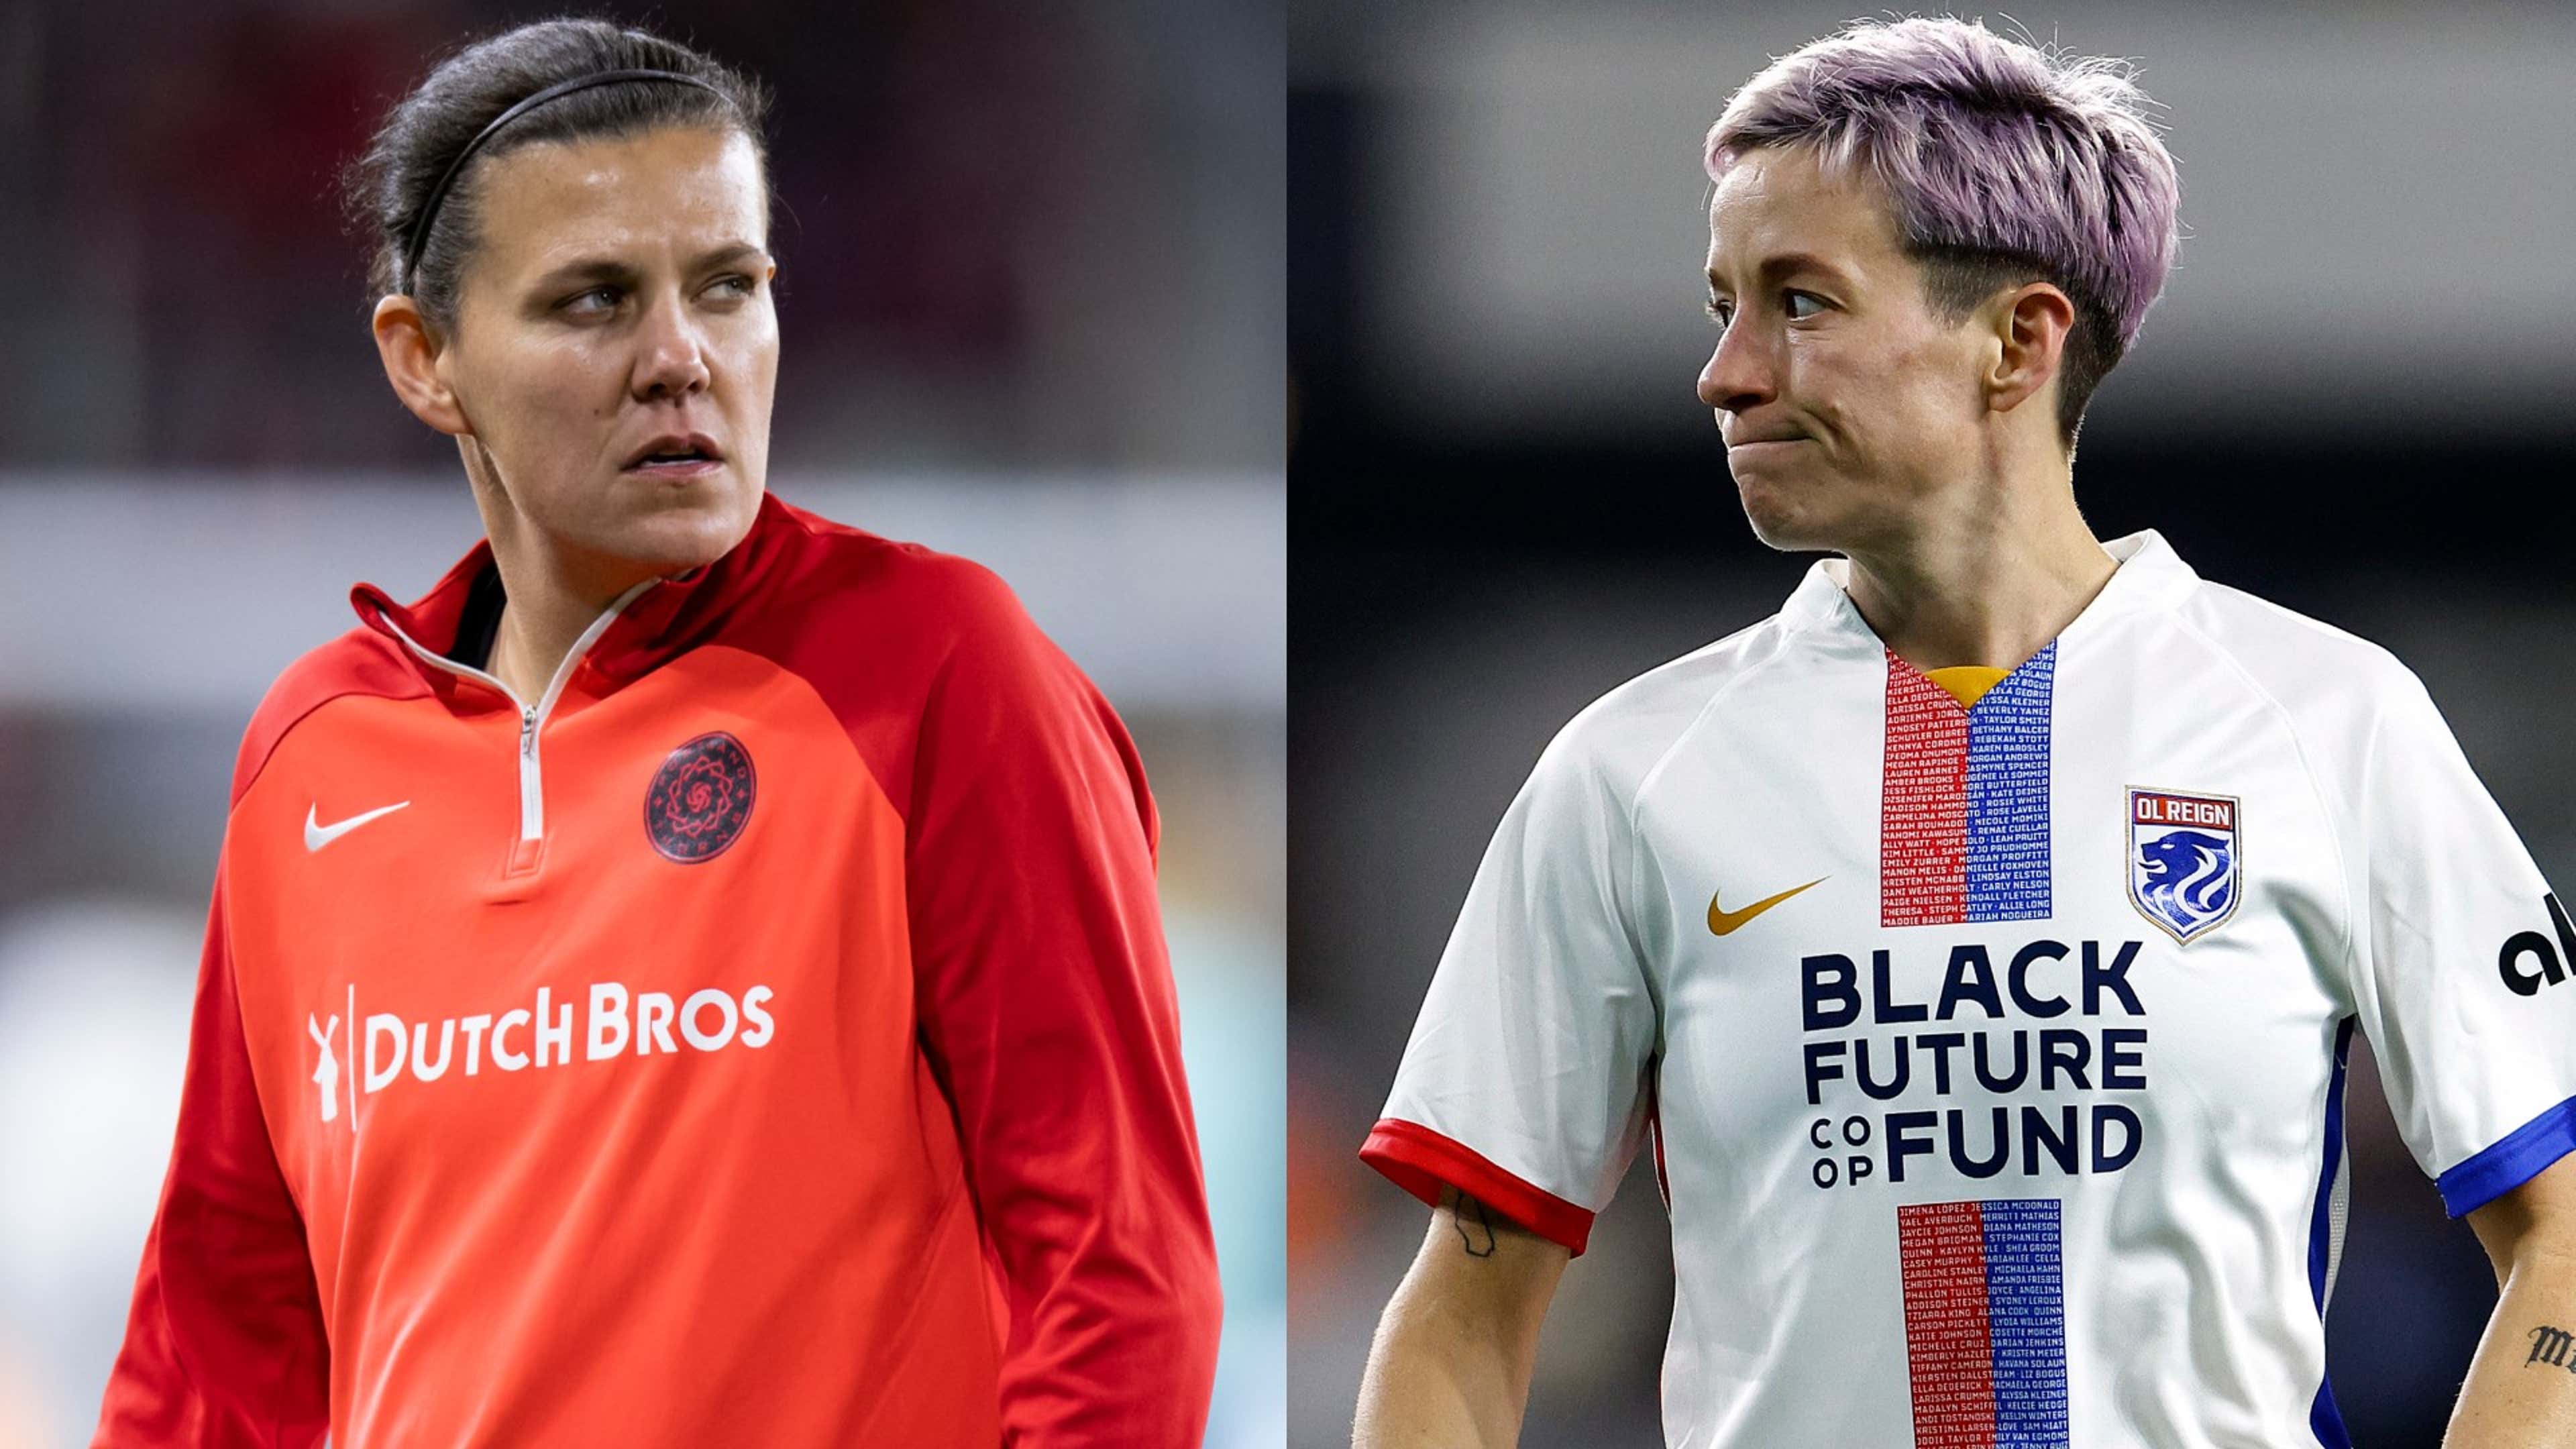 F*ck those guys!' - Inside OL Reign vs Portland Thorns, the NWSL's biggest  and best rivalry